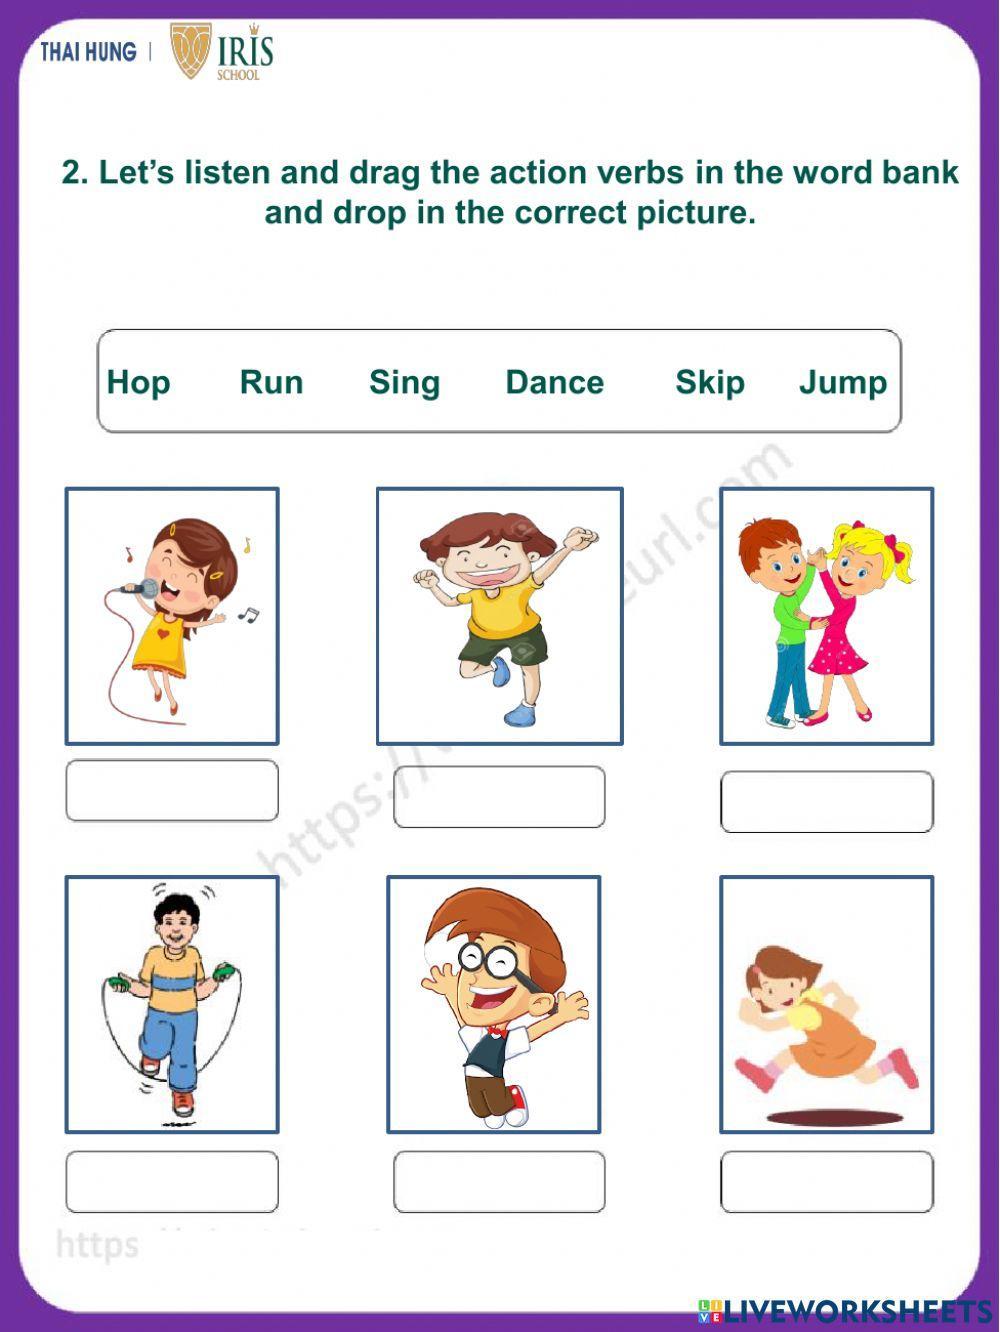 English-Worksheet about Action Verbs